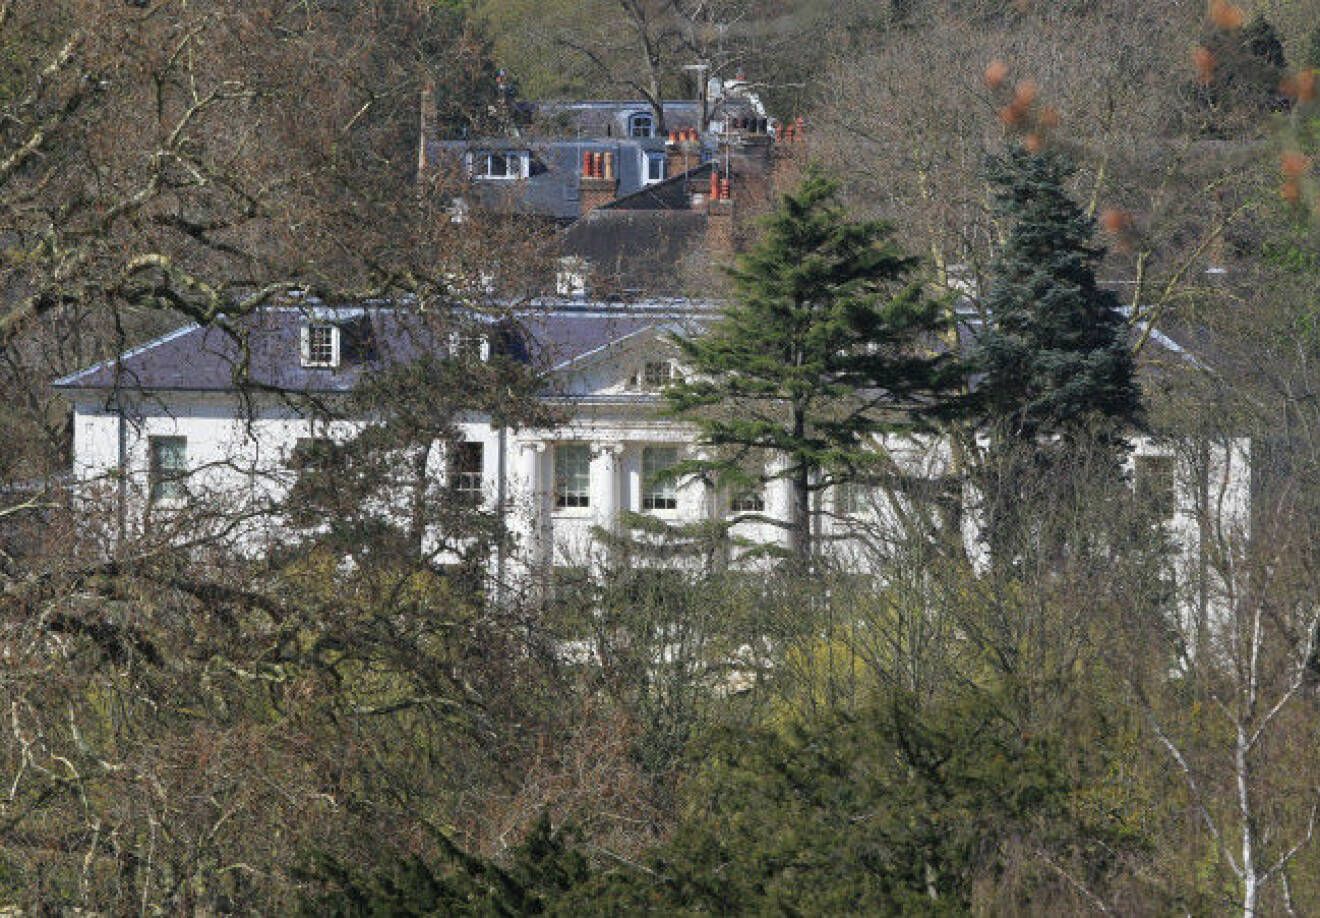 Brad Pitt and Angelina Jolie have moved into a new home. The Hollywood couple are reportedly renting the property on the River Thames for £14,700-per-month. The eight bedroom property looks very much like the Whitehouse in Washington DC. Featuring: View Where: United Kingdom When: 12 Apr 2016 Credit: WENN.com **No Internet Use** *** Local Caption *** 21.23739210